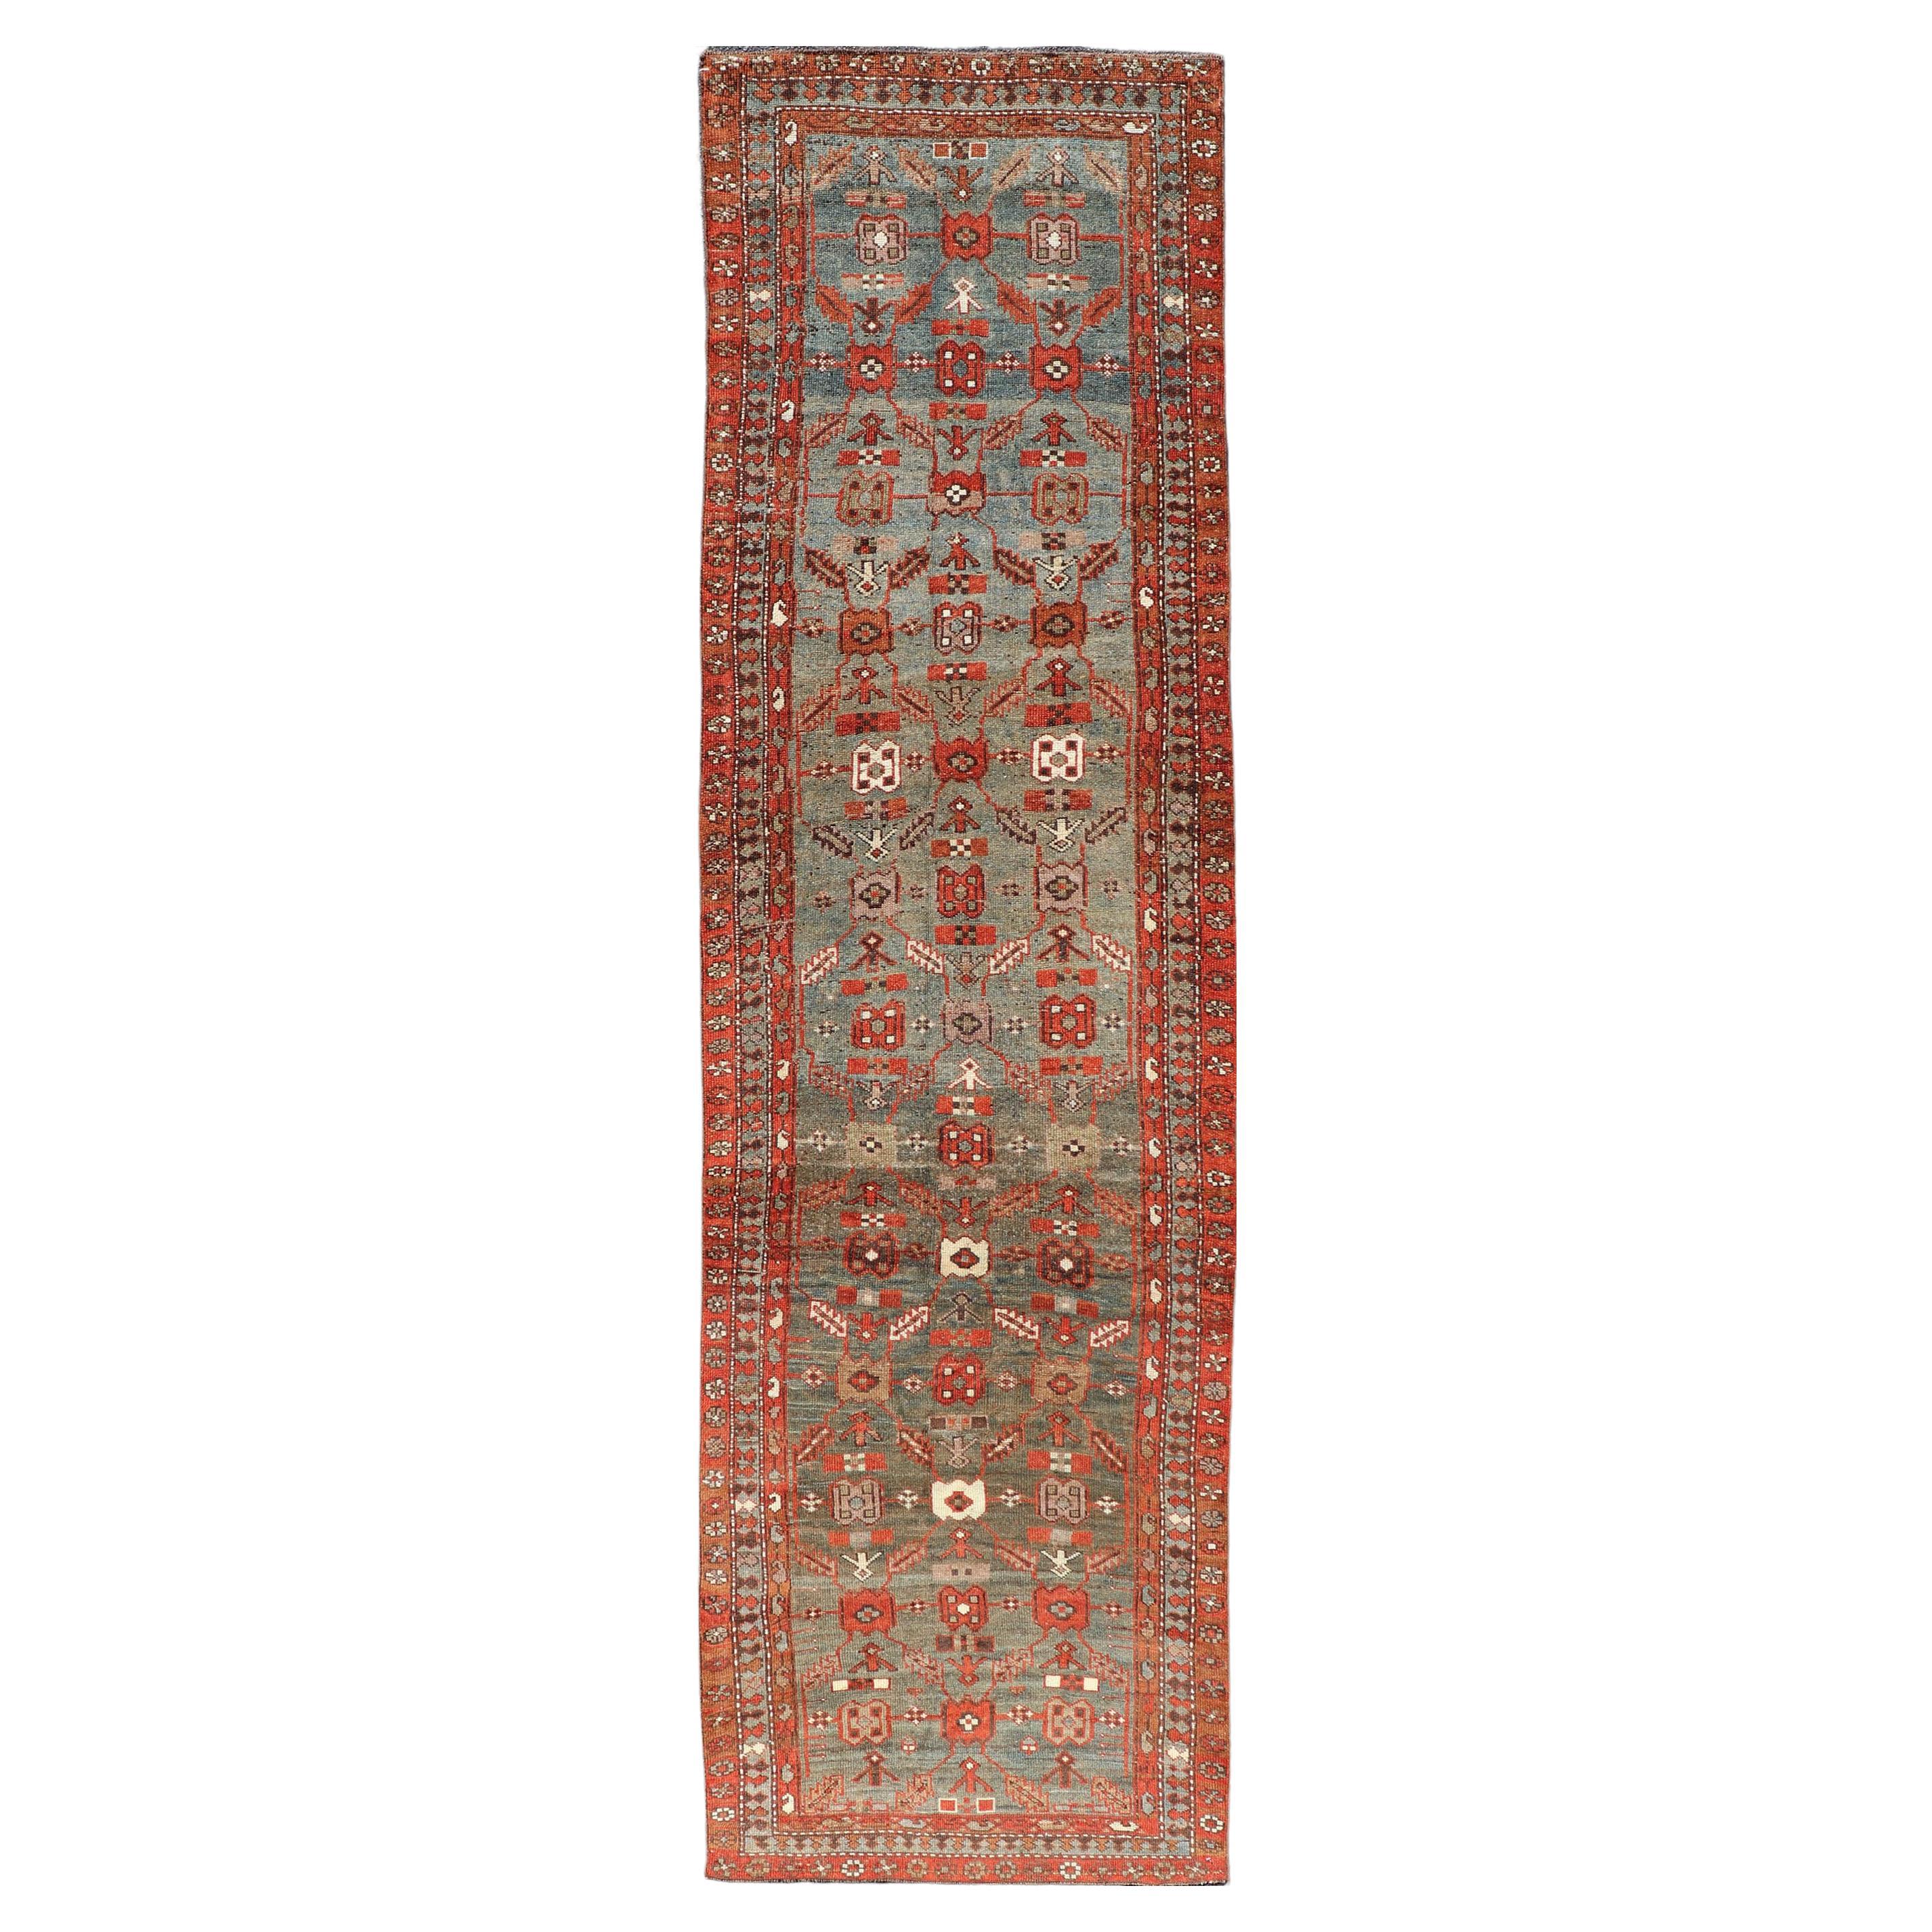 Kurdish Antique Runner in Vibrant Blue-Teal Background and Multi-Tiered Border